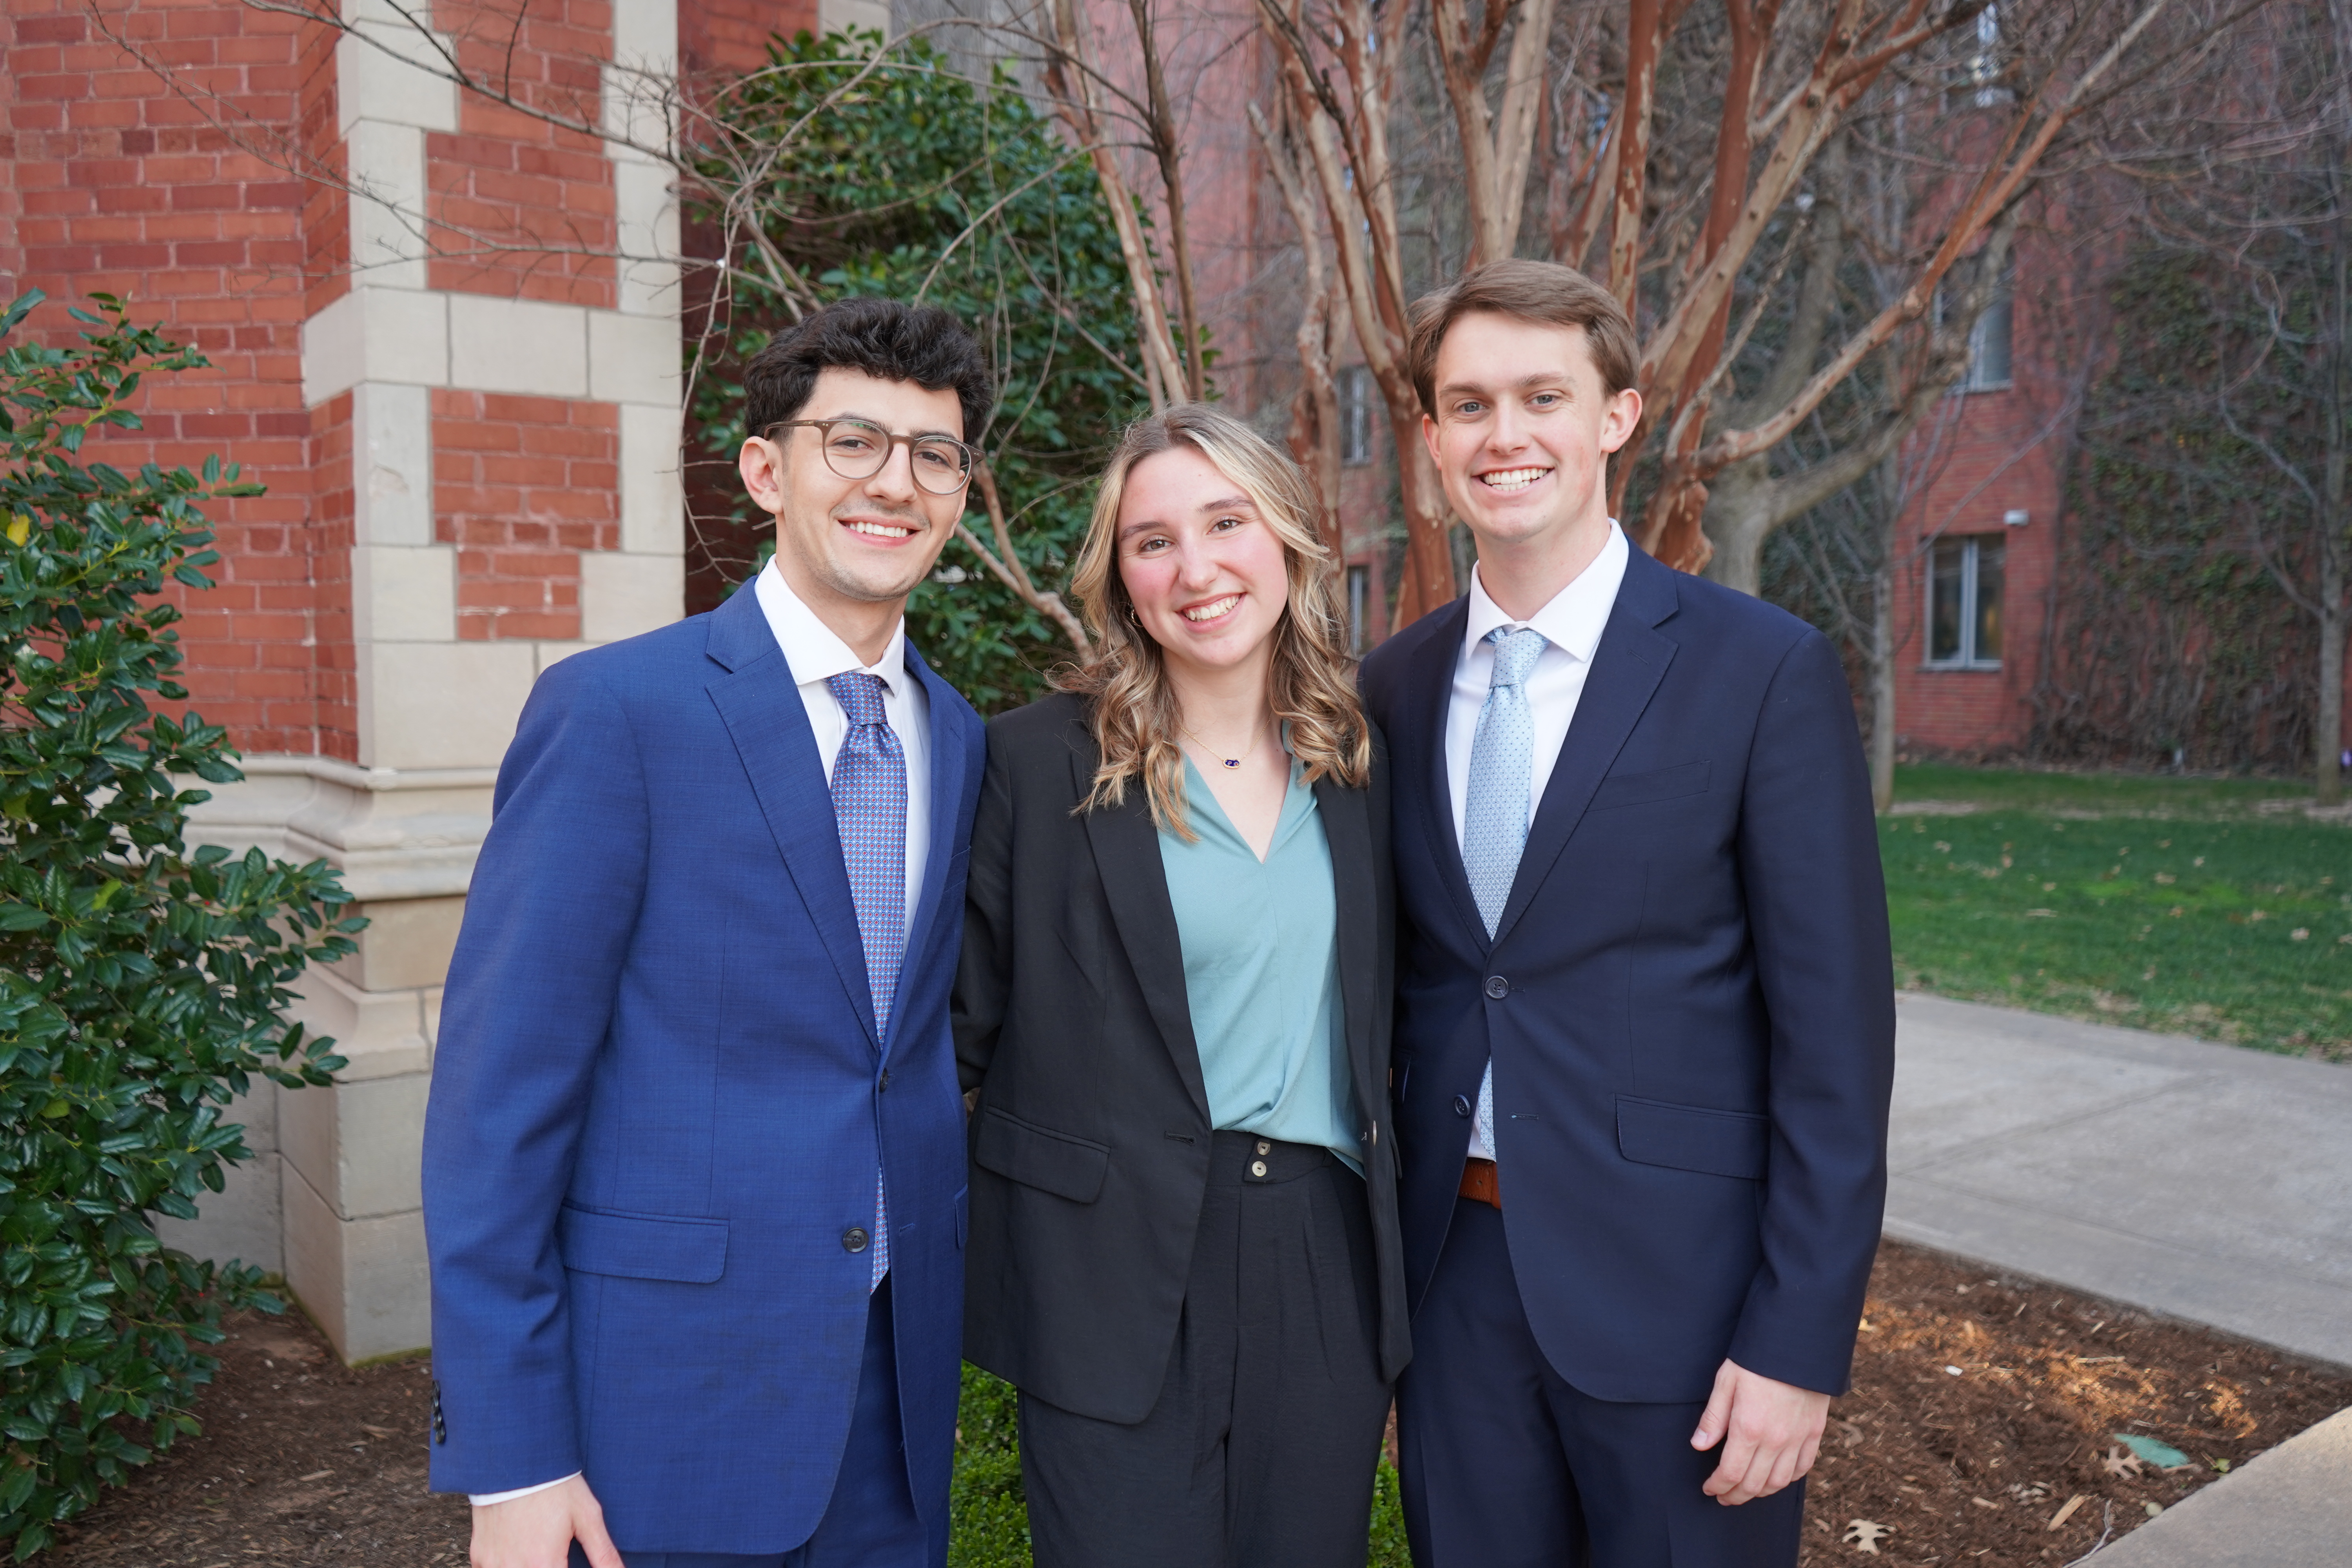 Three students in professional clothing.